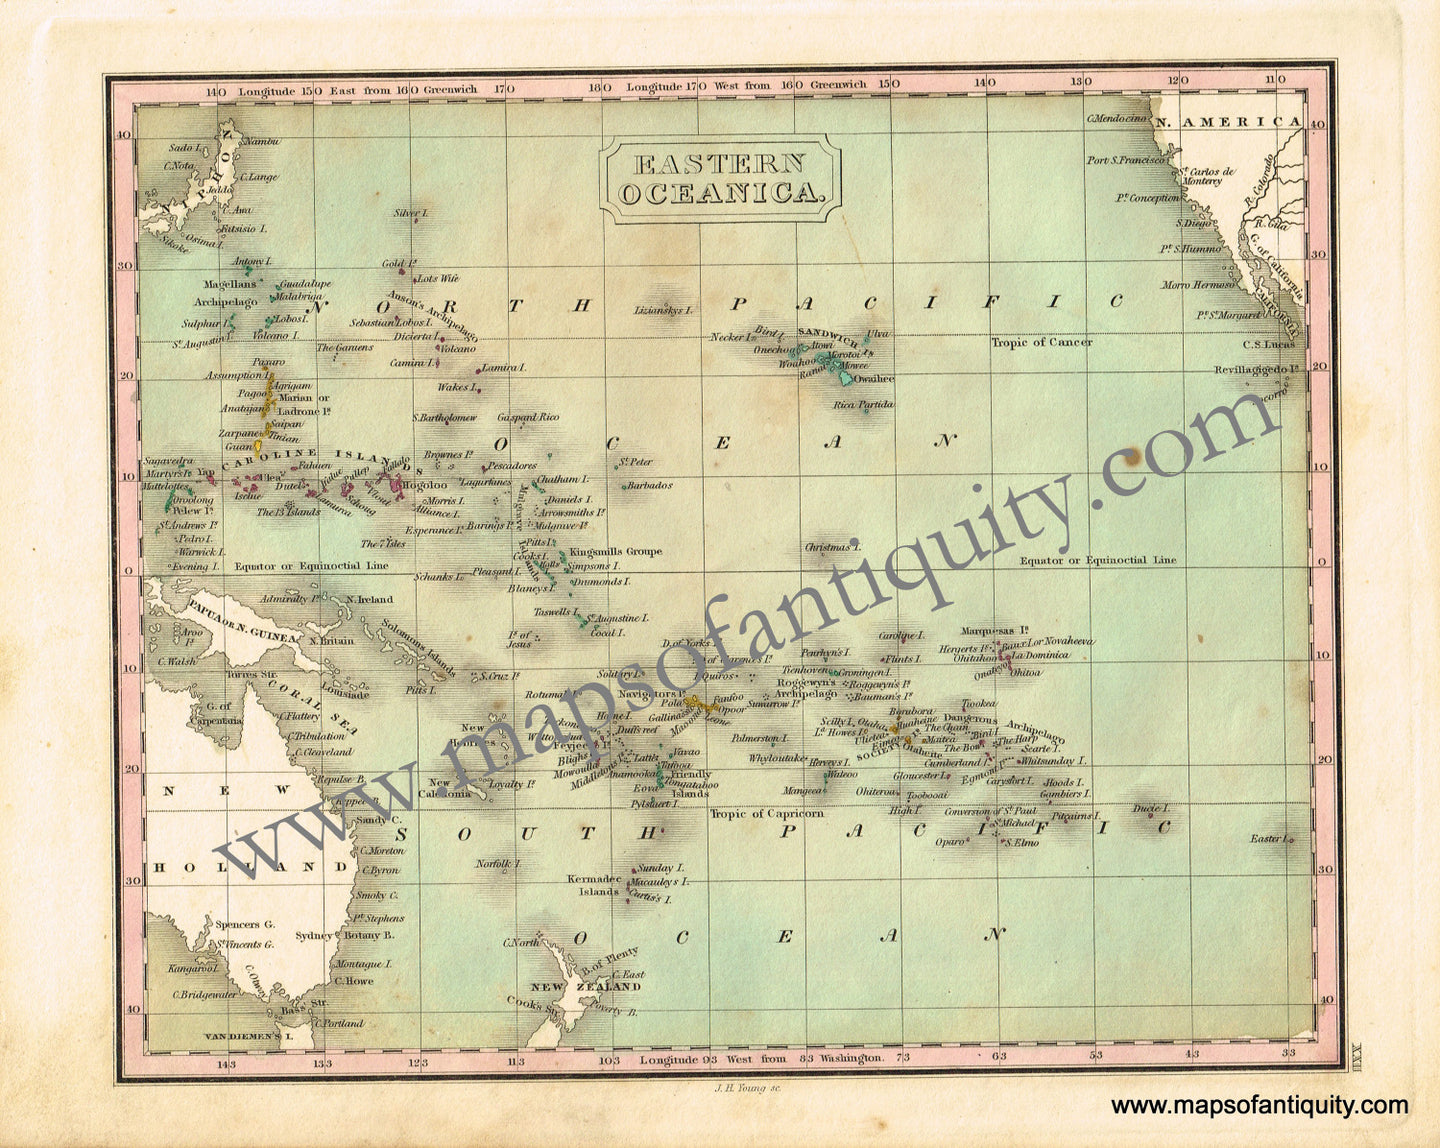 Antique-Hand-Colored-Map-Eastern-Oceanica-********-Oceania--1828-M.-Malte-Brun-Maps-Of-Antiquity